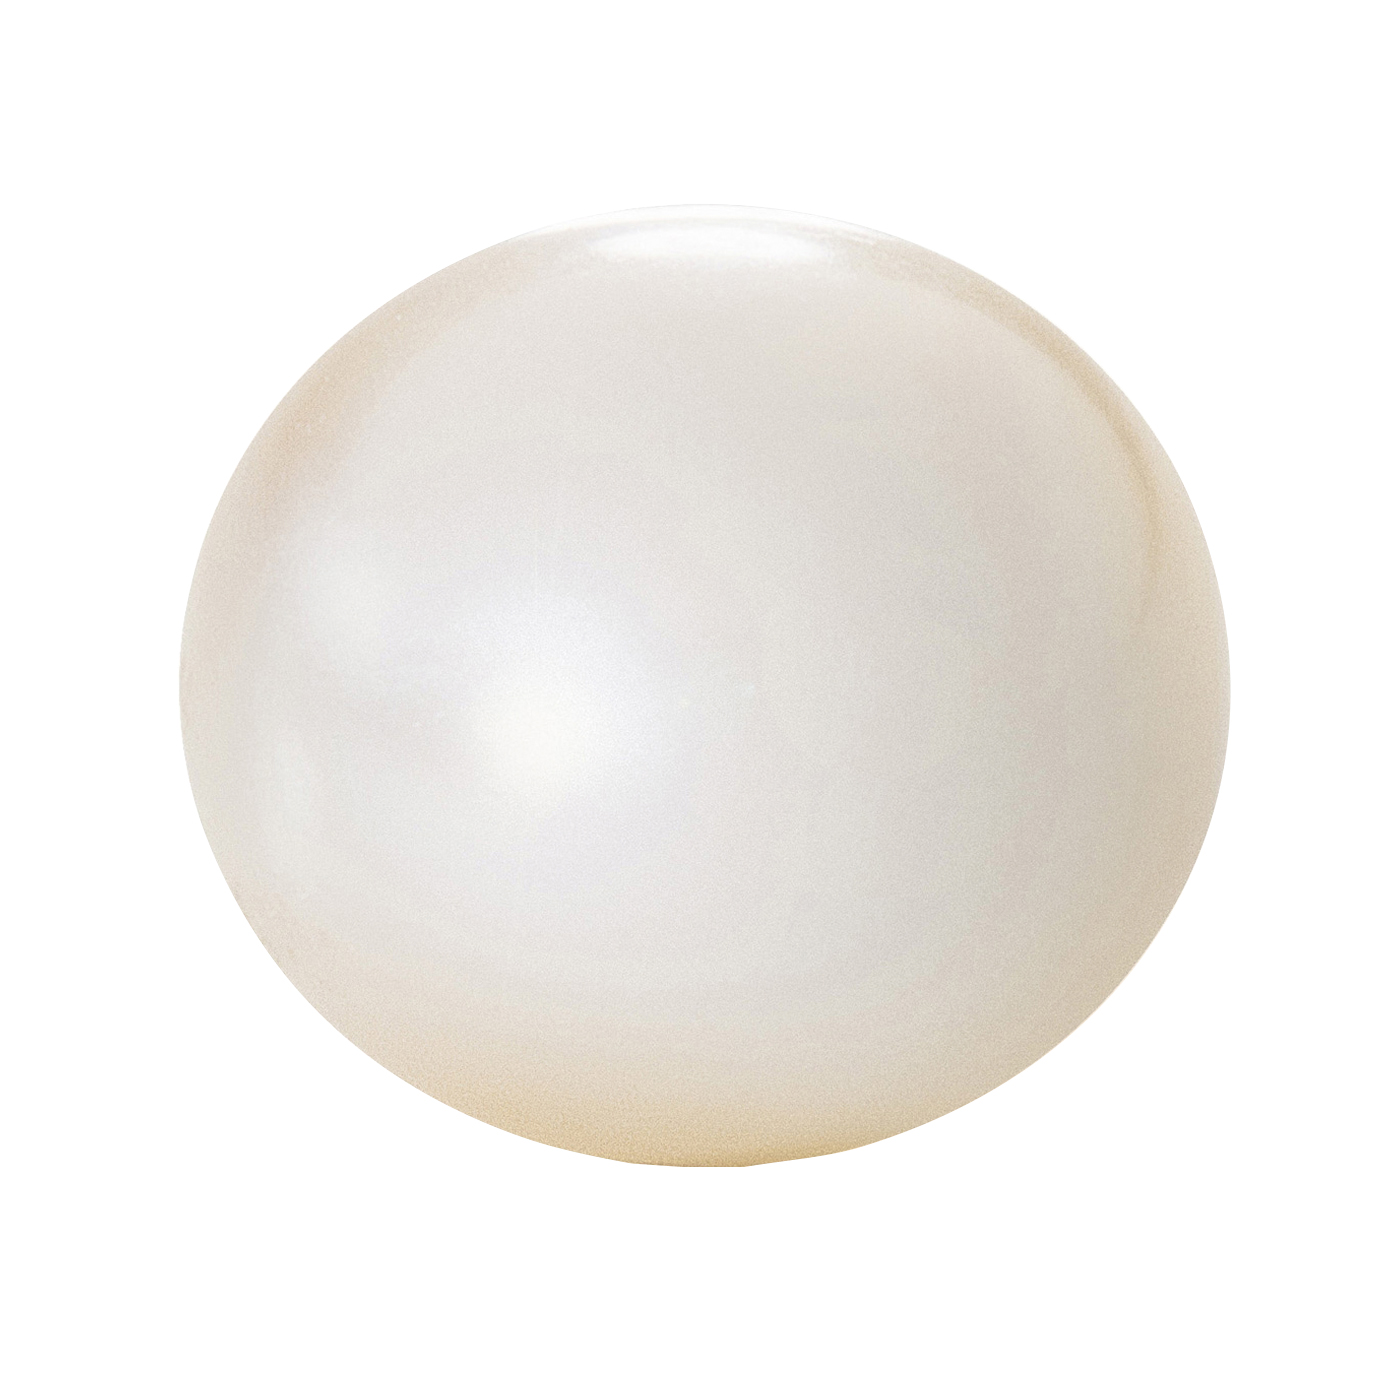 Cultured Pearl, Freshwater, Bouton, ø 7.0-7.5 mm, White - 1 piece